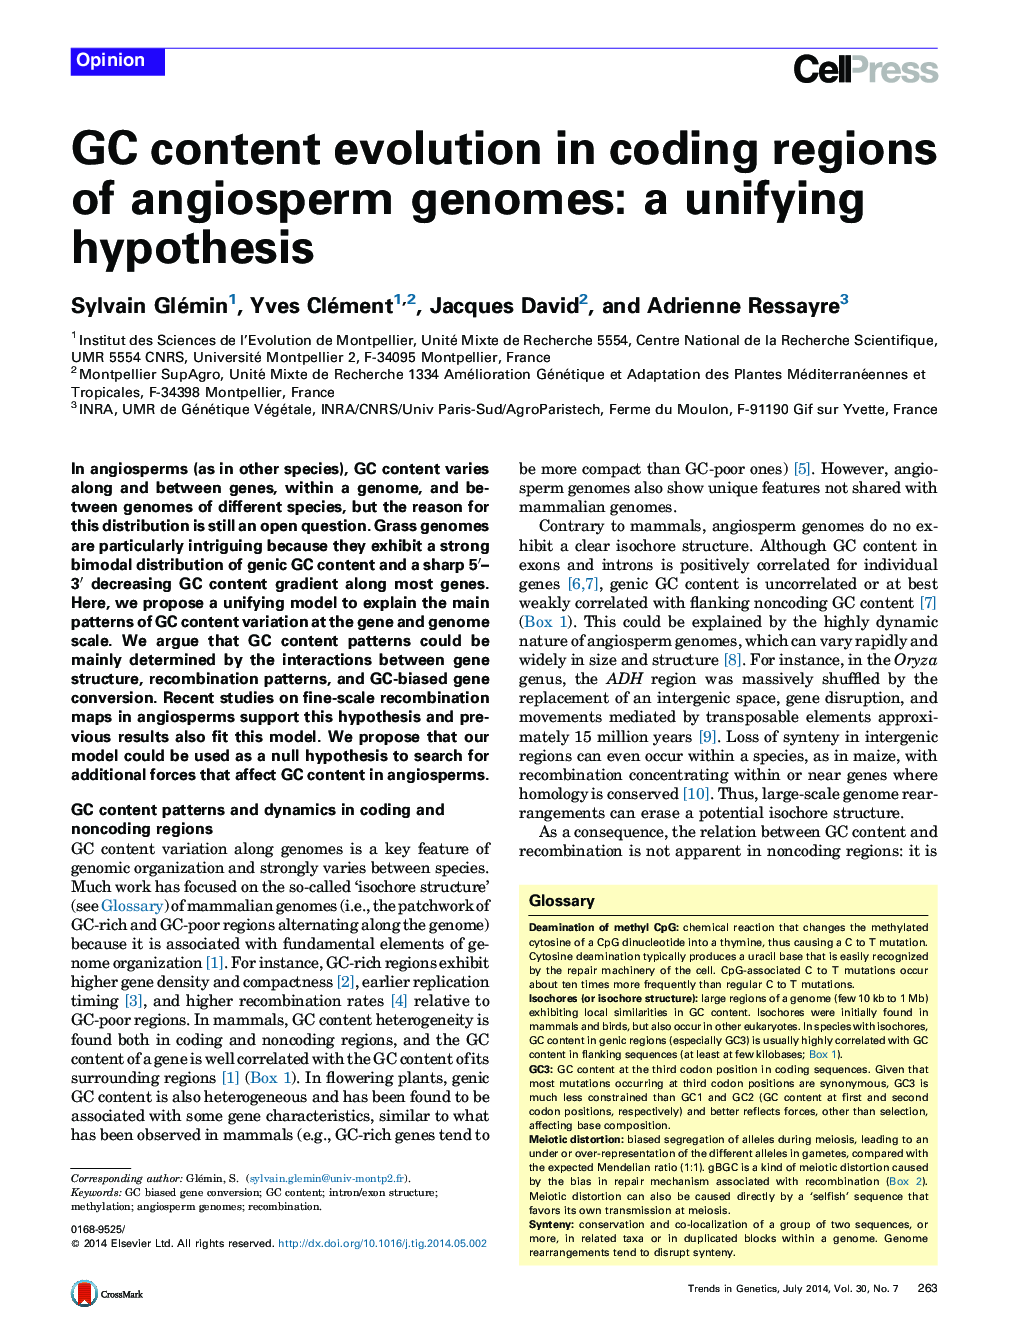 GC content evolution in coding regions of angiosperm genomes: a unifying hypothesis